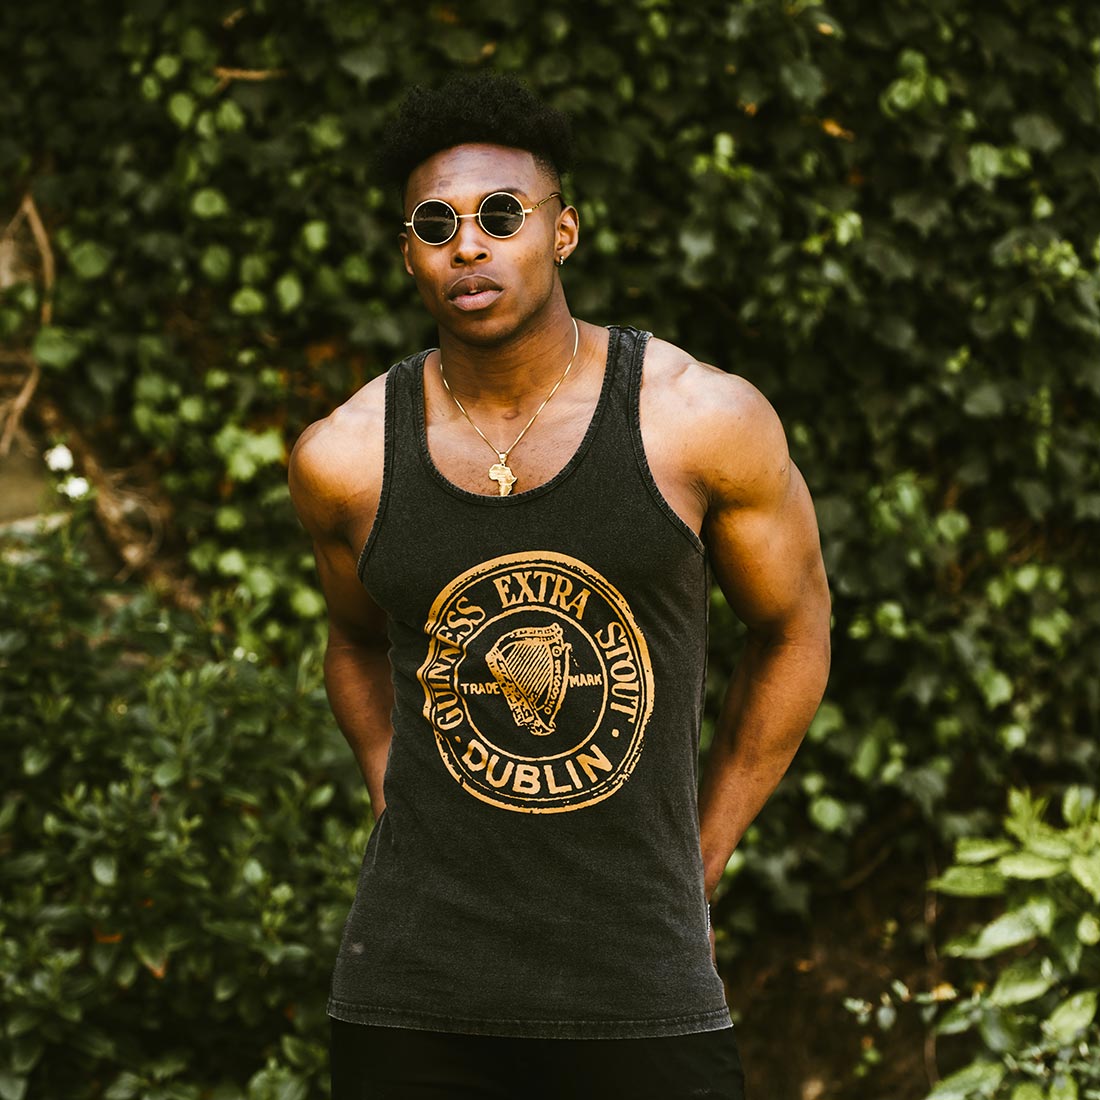 A young man wearing a Guinness Washed Extra Stout Tank Top and sunglasses enjoys the summer months sipping on a refreshing Guinness.